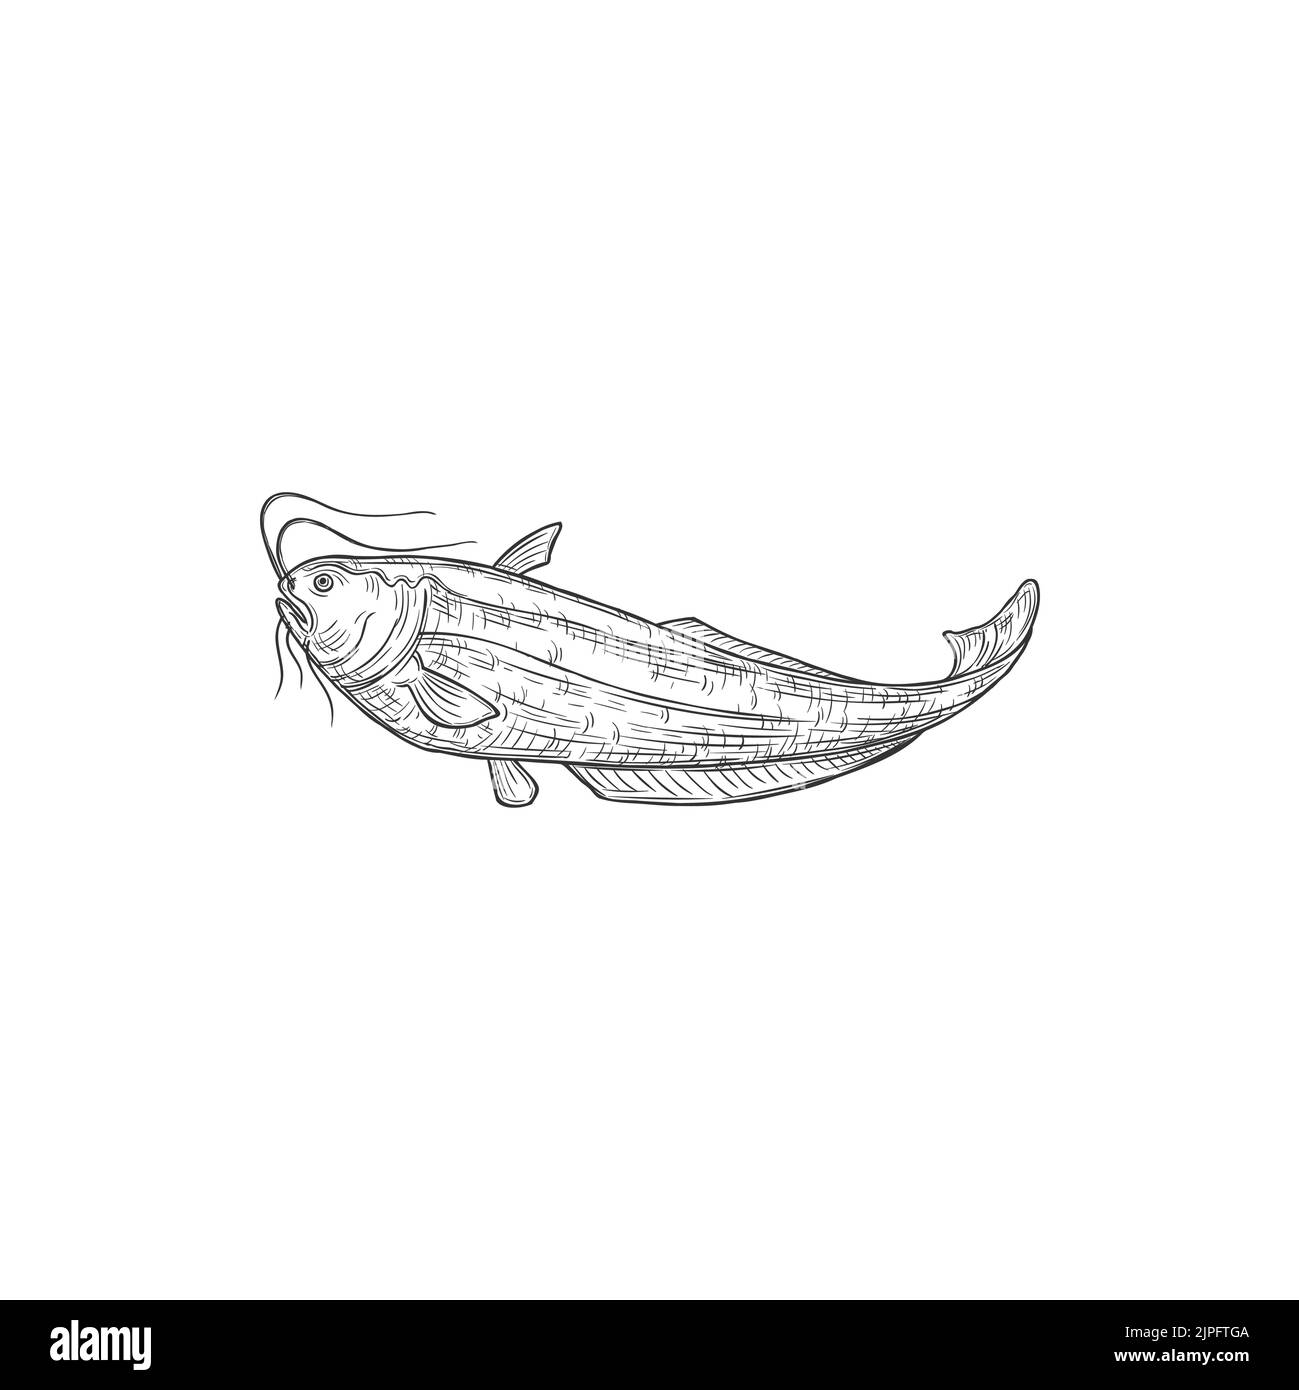 Catfish or sheatfish isolated ray-finished fish monochrome icon. Vecto mekong giant catfish, Candiru toothpick fish with whiskers. Siluridae species, ray-finished catfishes Siluriformes or Nematognath Stock Vector